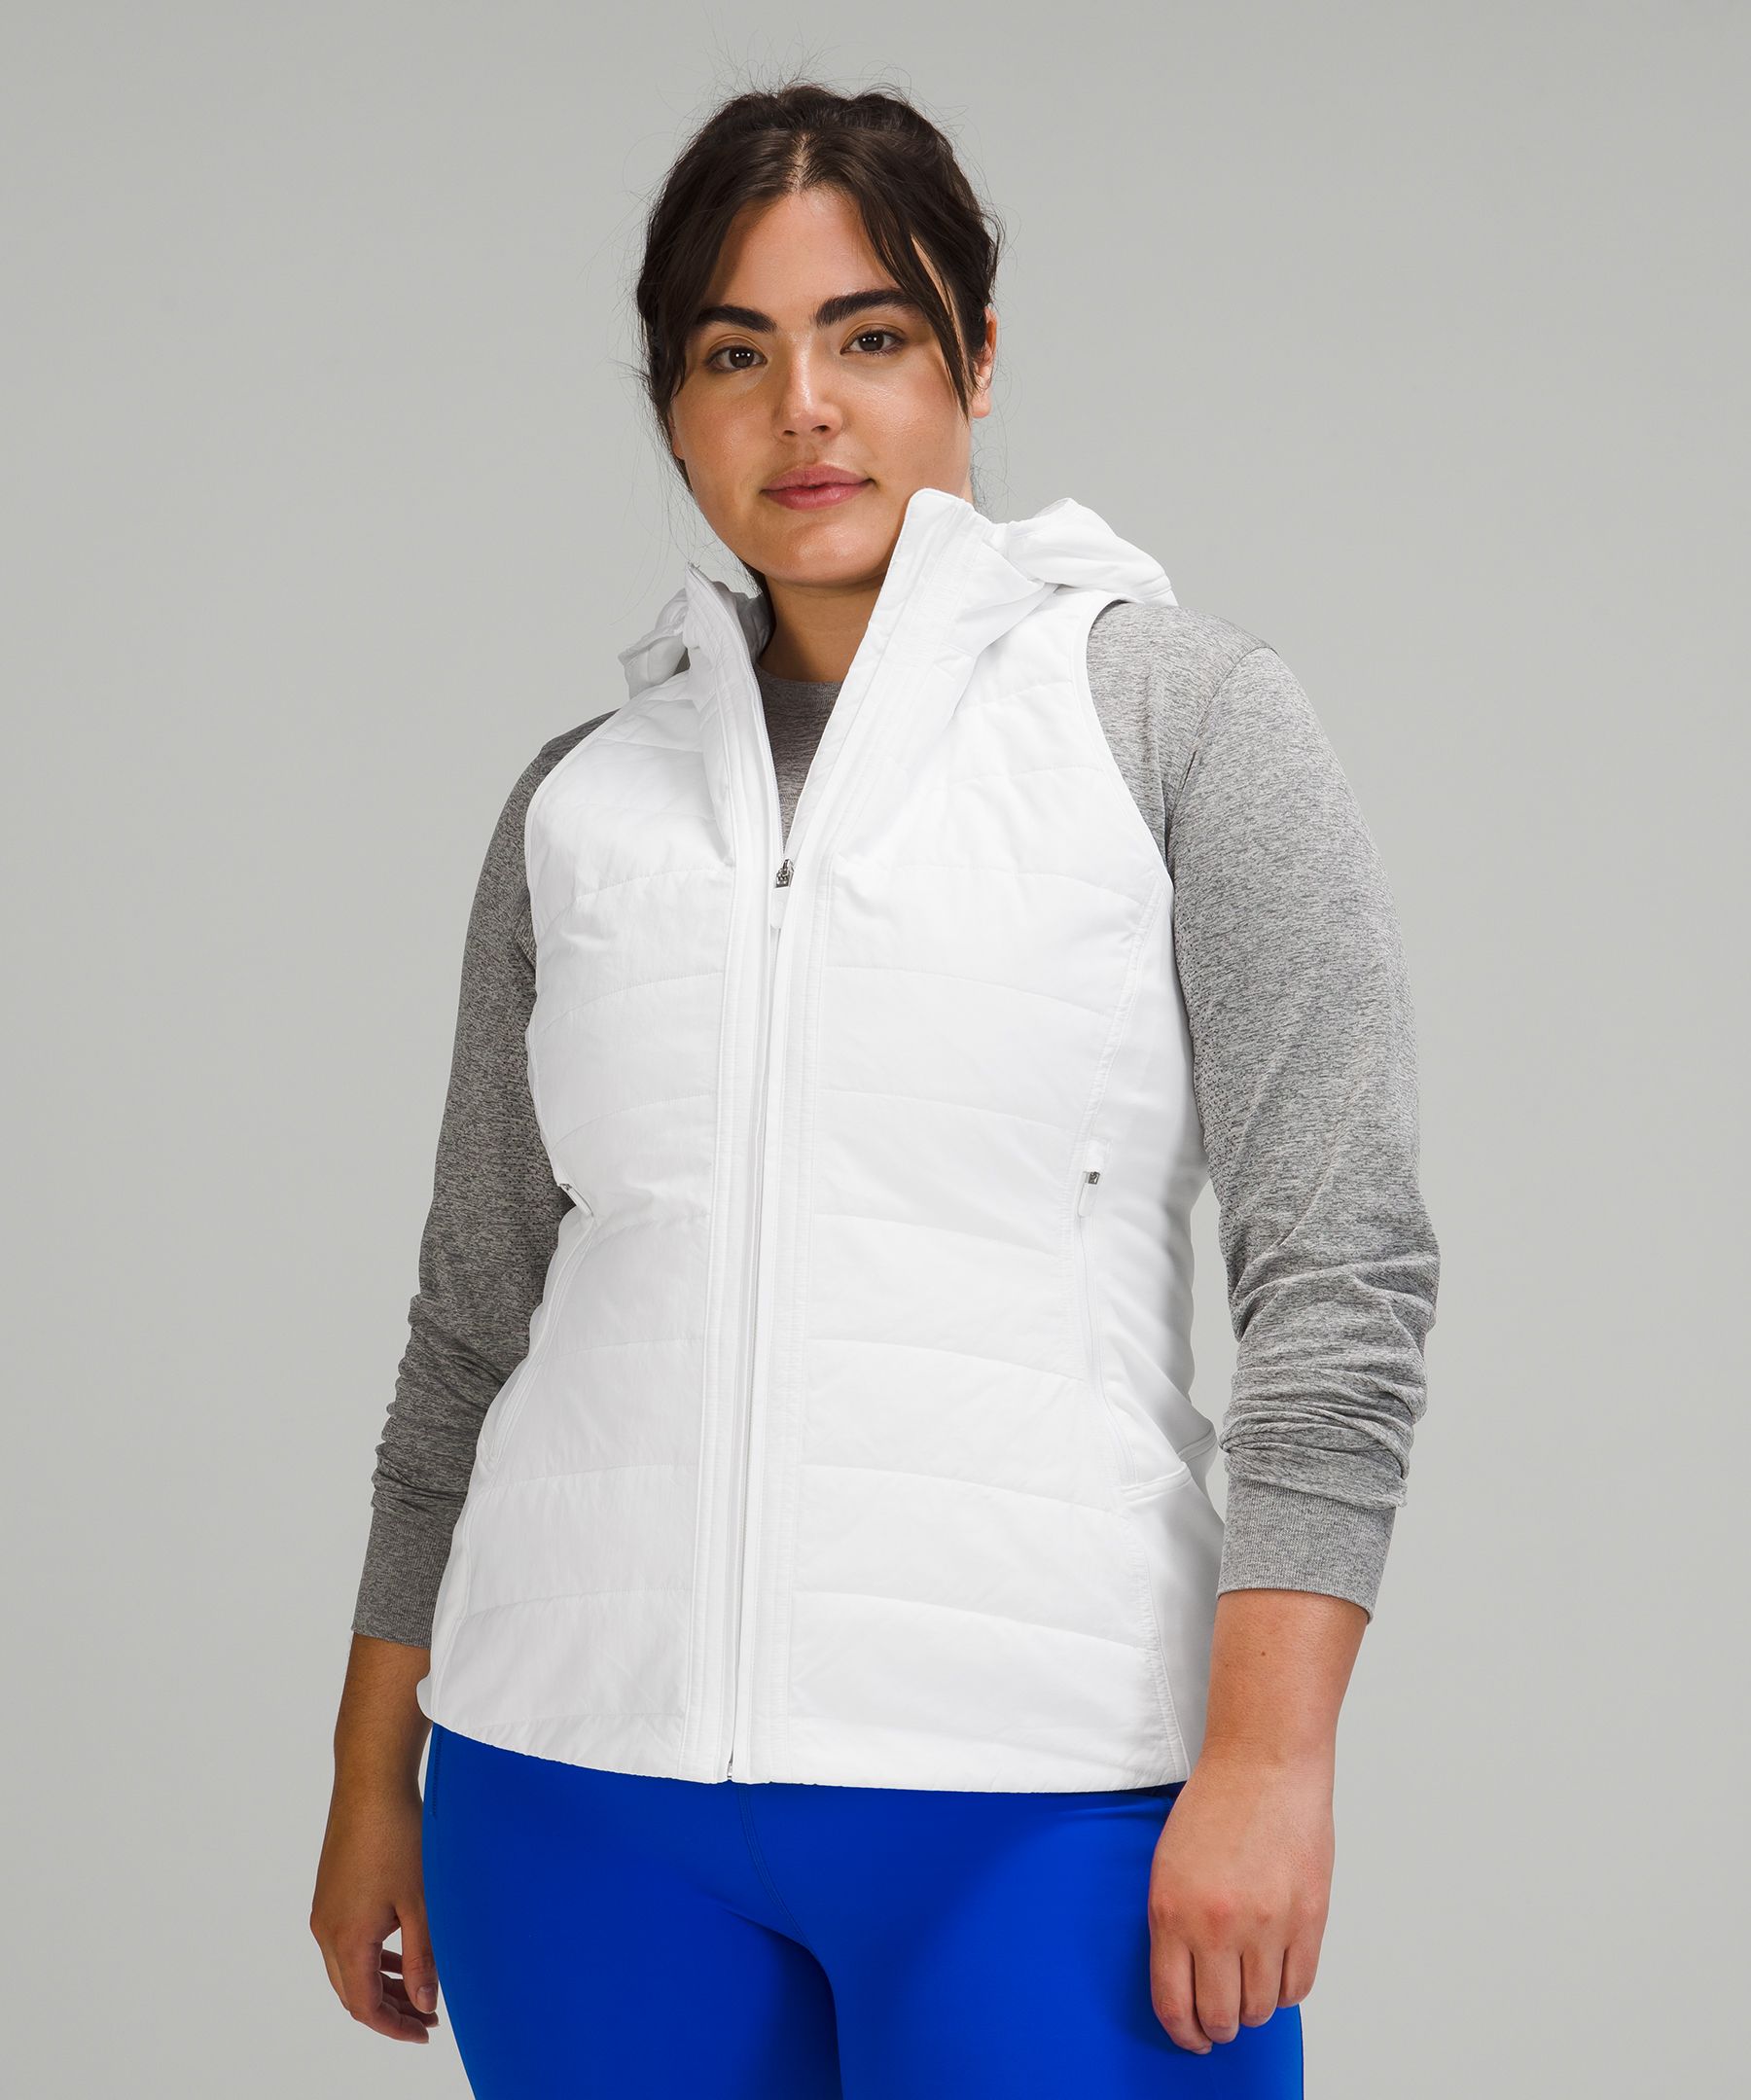 lululemon athletica Another Mile Vest in White